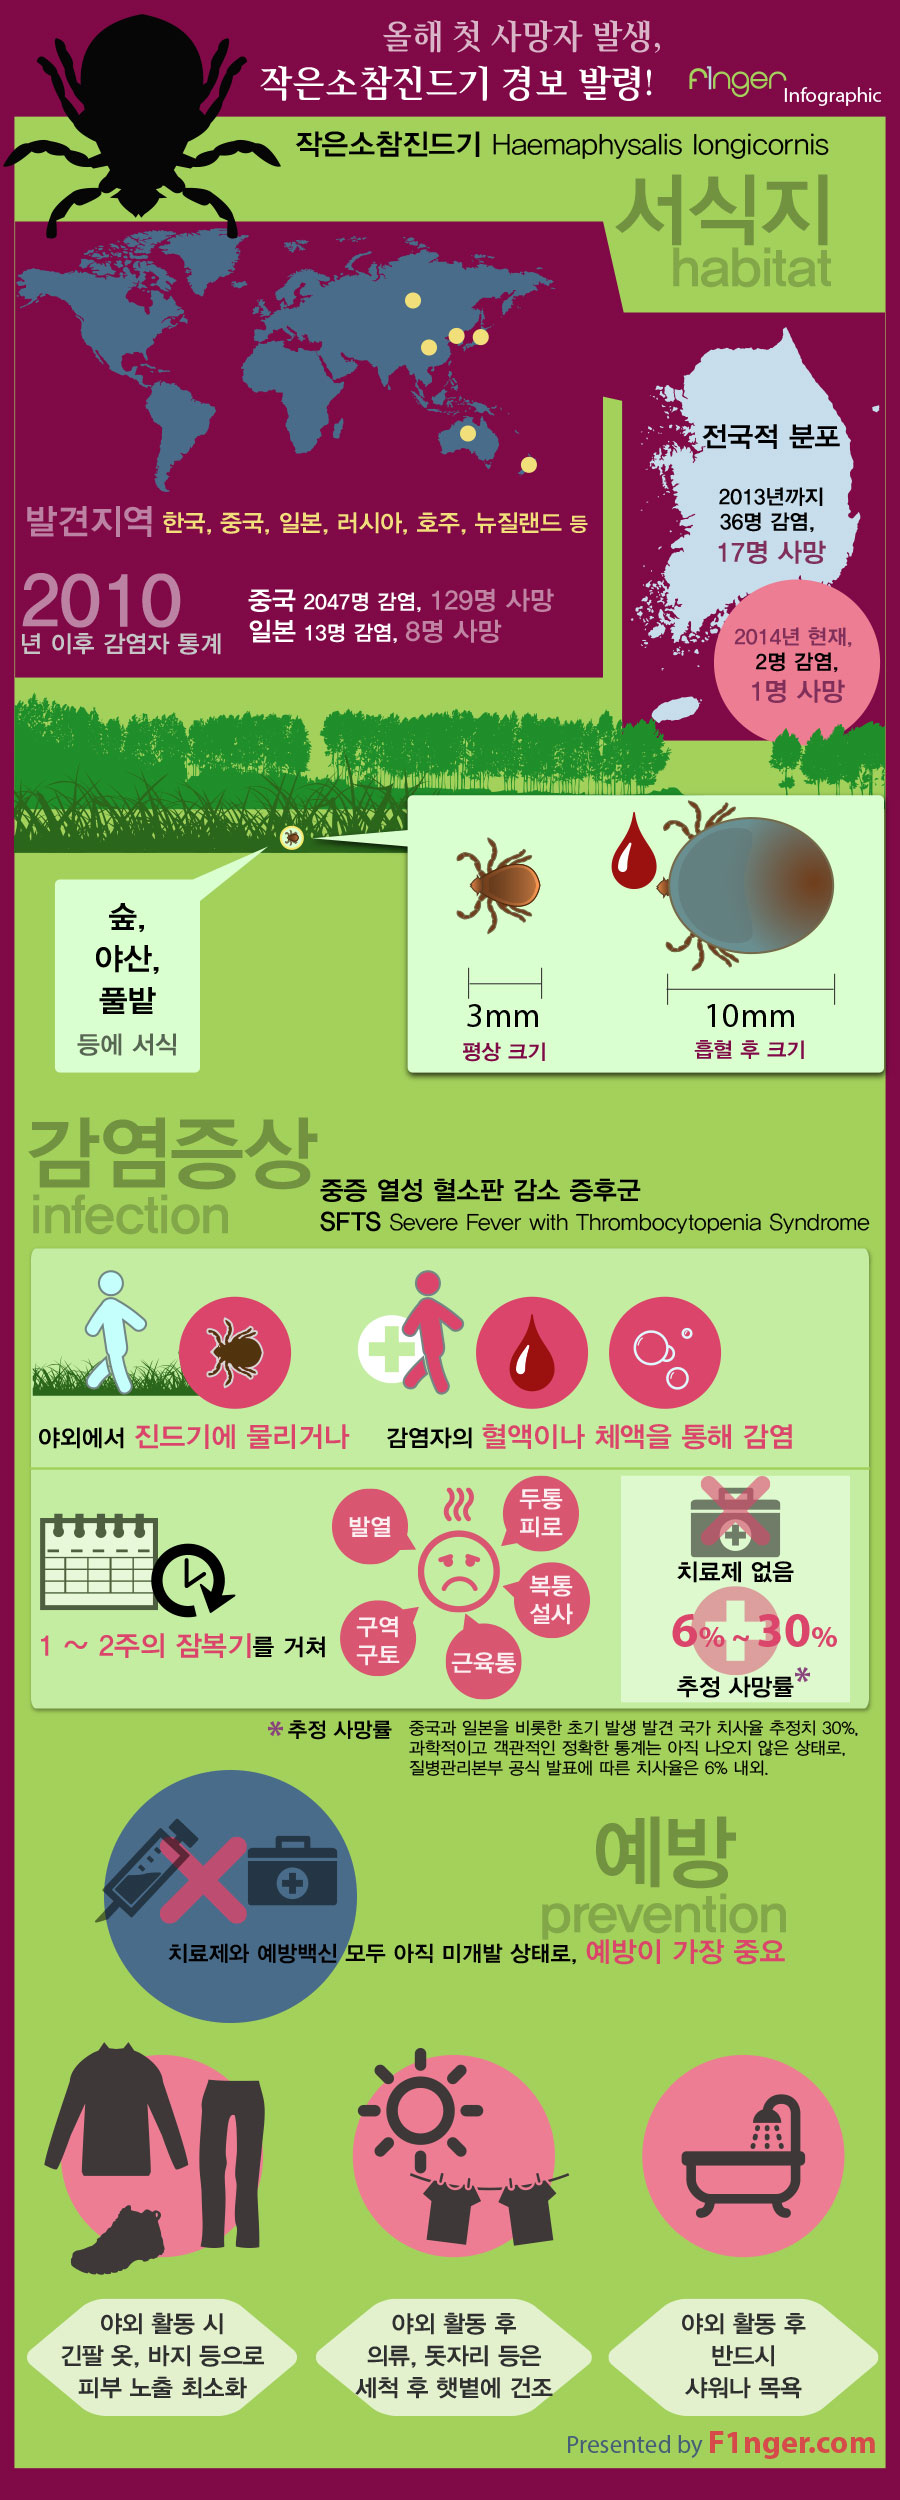 Mites-Infographic-by-F1nger